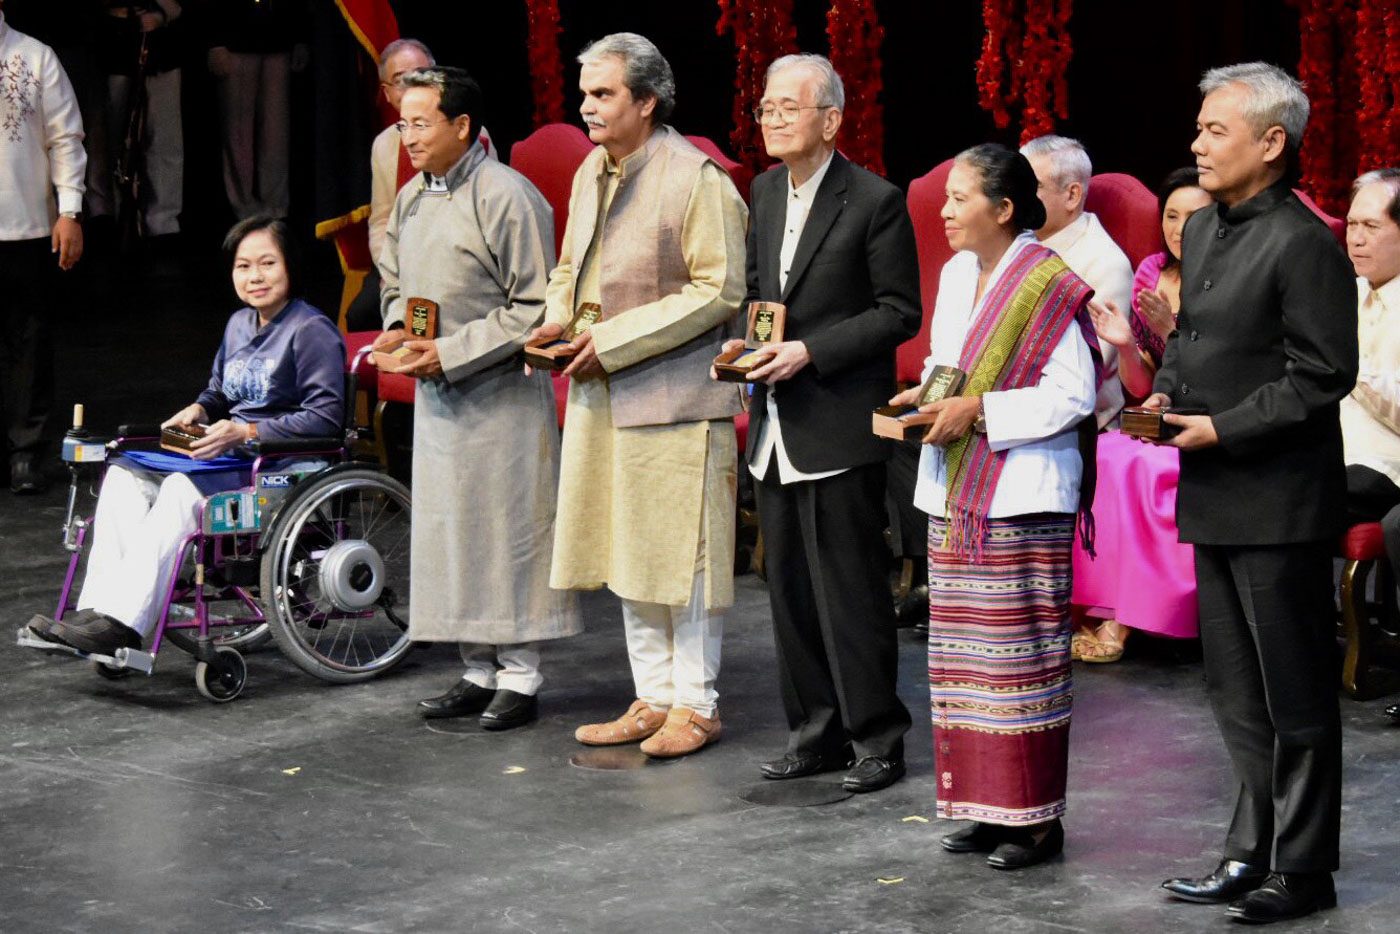 AWARDEES. The 2018 Ramon Magsaysay Awardees presented to the audience. From left Vo Thi Huang Yen of Vietnam, Sonam Wangchuk of India, Bharat Vatwani also of India, Howard Dee of the Philippines, Maria de Lourdes Martins. Ruz of Timor Leste and Youk Chhang of Cambodia. The presentation ceremonies was held at the Cultural Center of the Philippines in Pasay City. Photo by Angie de Silva/Rappler 